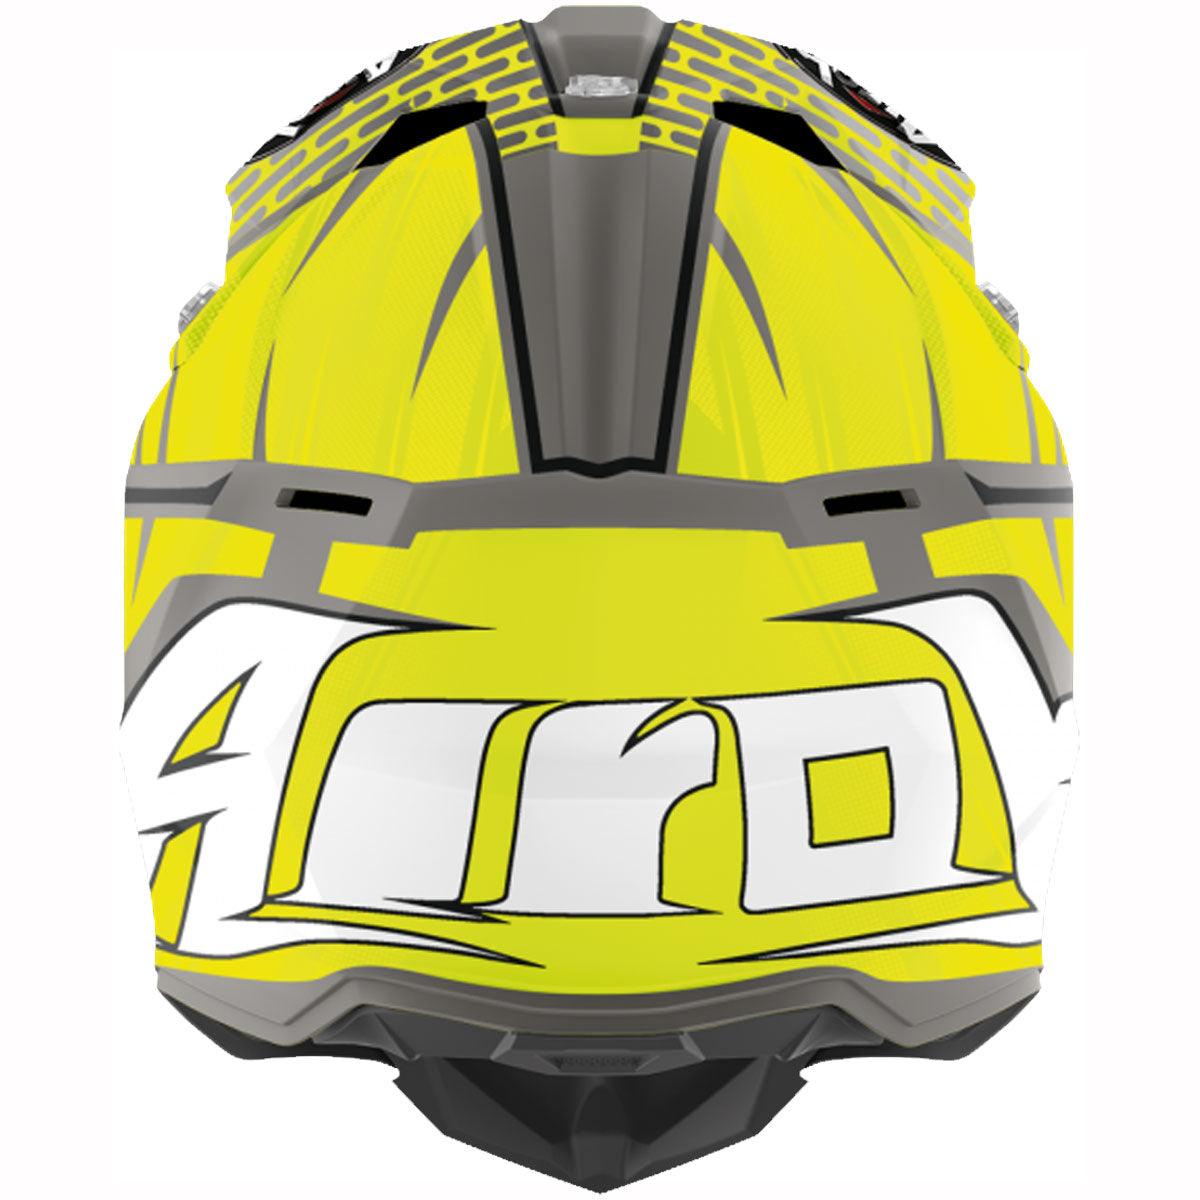 How does the Airoh Wraap MX Helmet fit? If you are used to a Fox helmet, the fit on the Airoh Wraap helmet is slightly narrower. People with their head size very much on the cusp between 2 sizes prefer to go up one size.